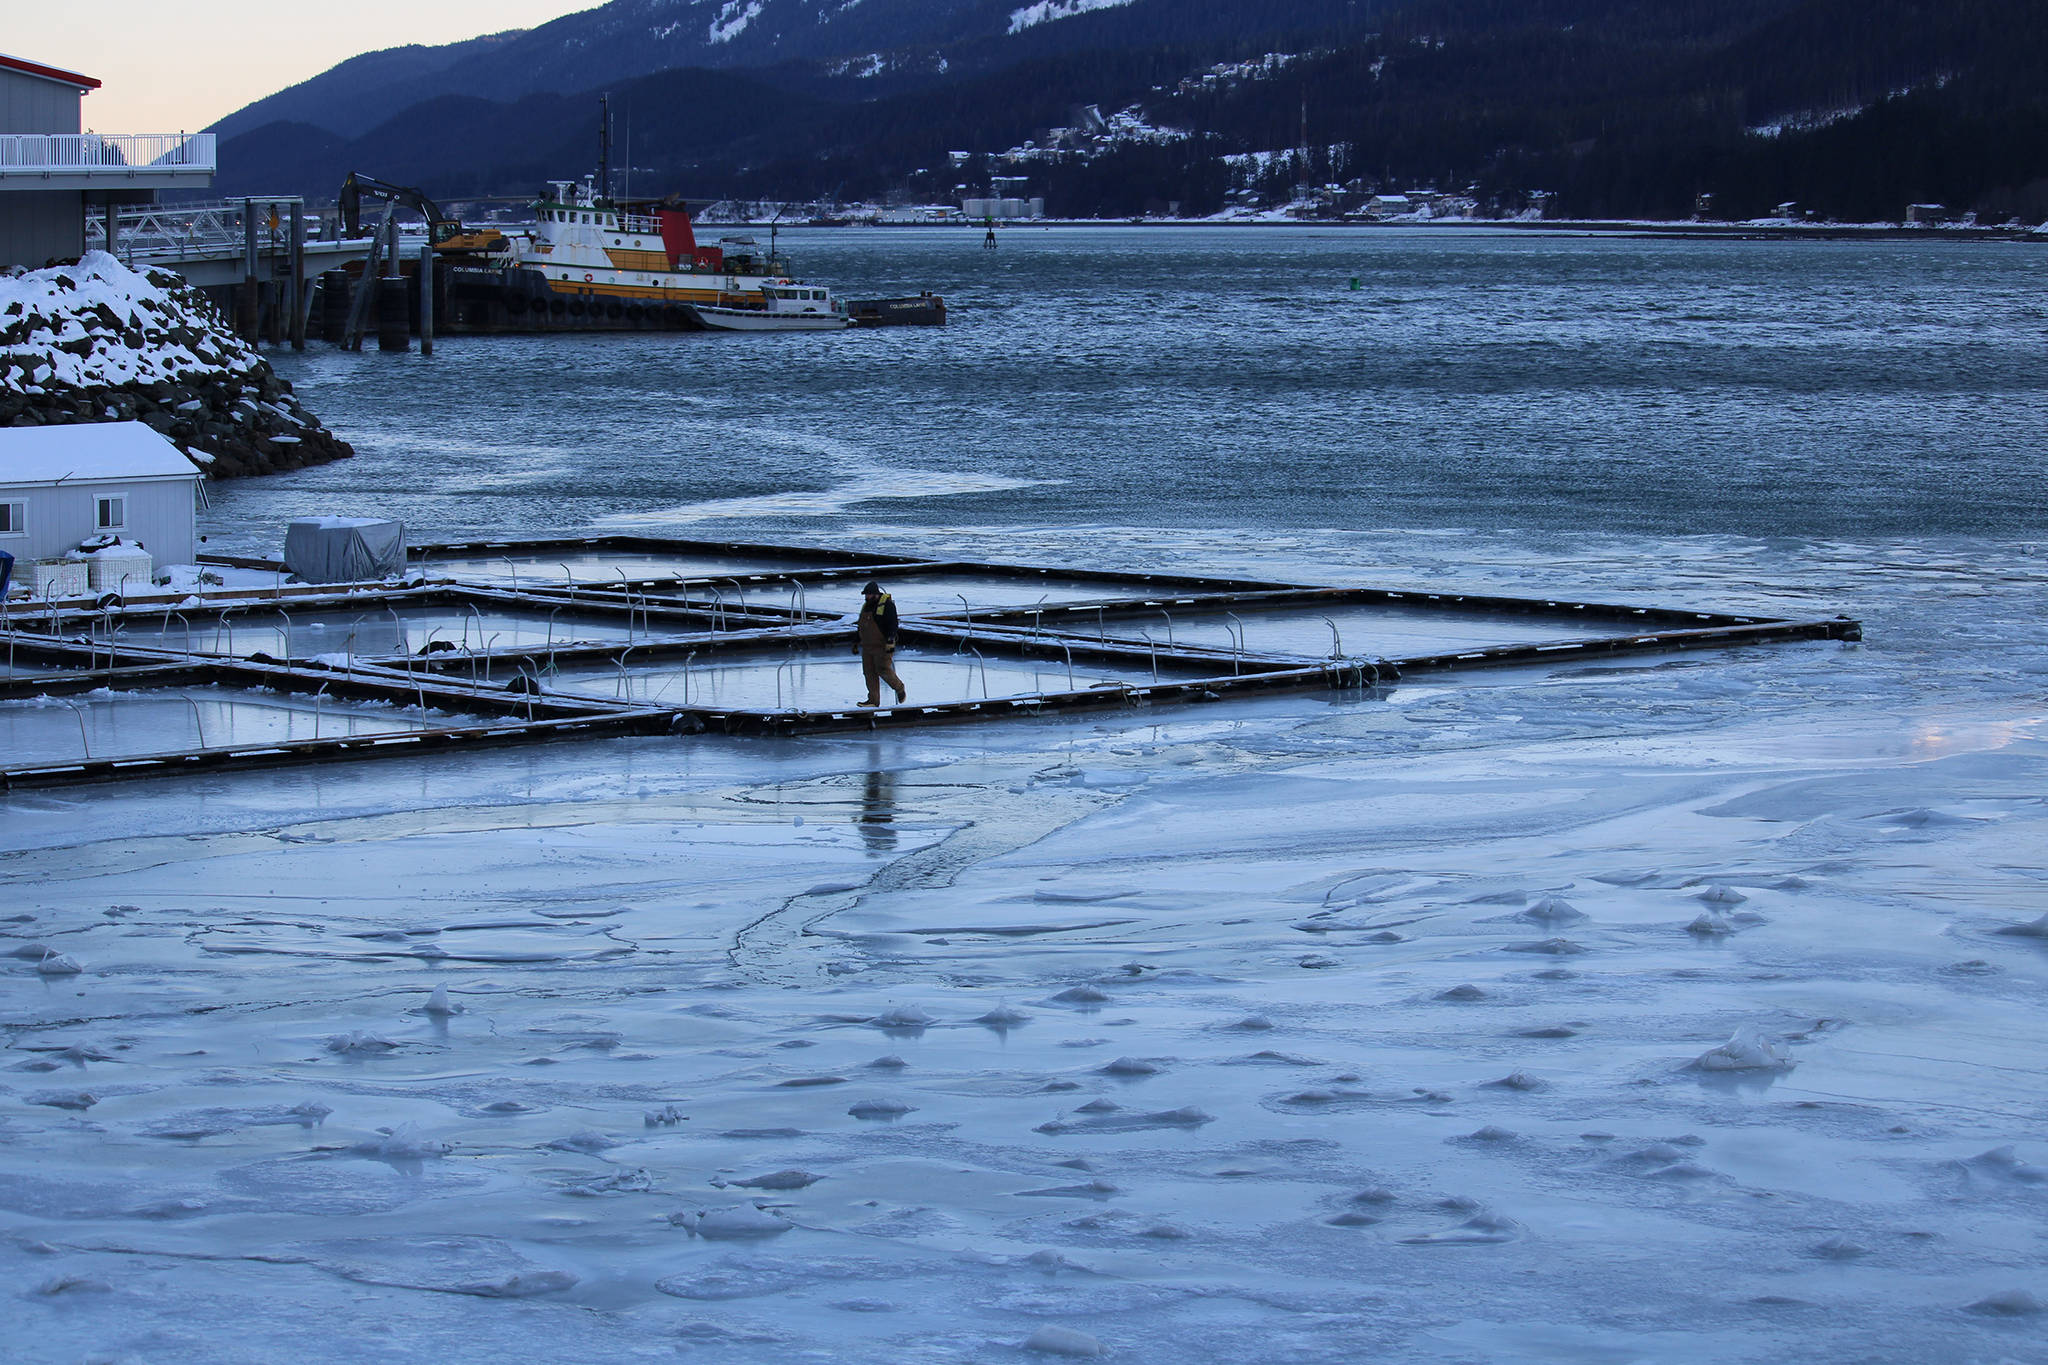 A worker walks on the pier near Douglas Island Pink and Chum Inc's Macaulay Salmon Hatchery Thursday afternoon. Ice has formed on the Gastineau Channel amid frigid temperatures brought on by a high pressure ridge over mainland Alaska and Western Canada. (Dana Zigmund / Juneau Empire)